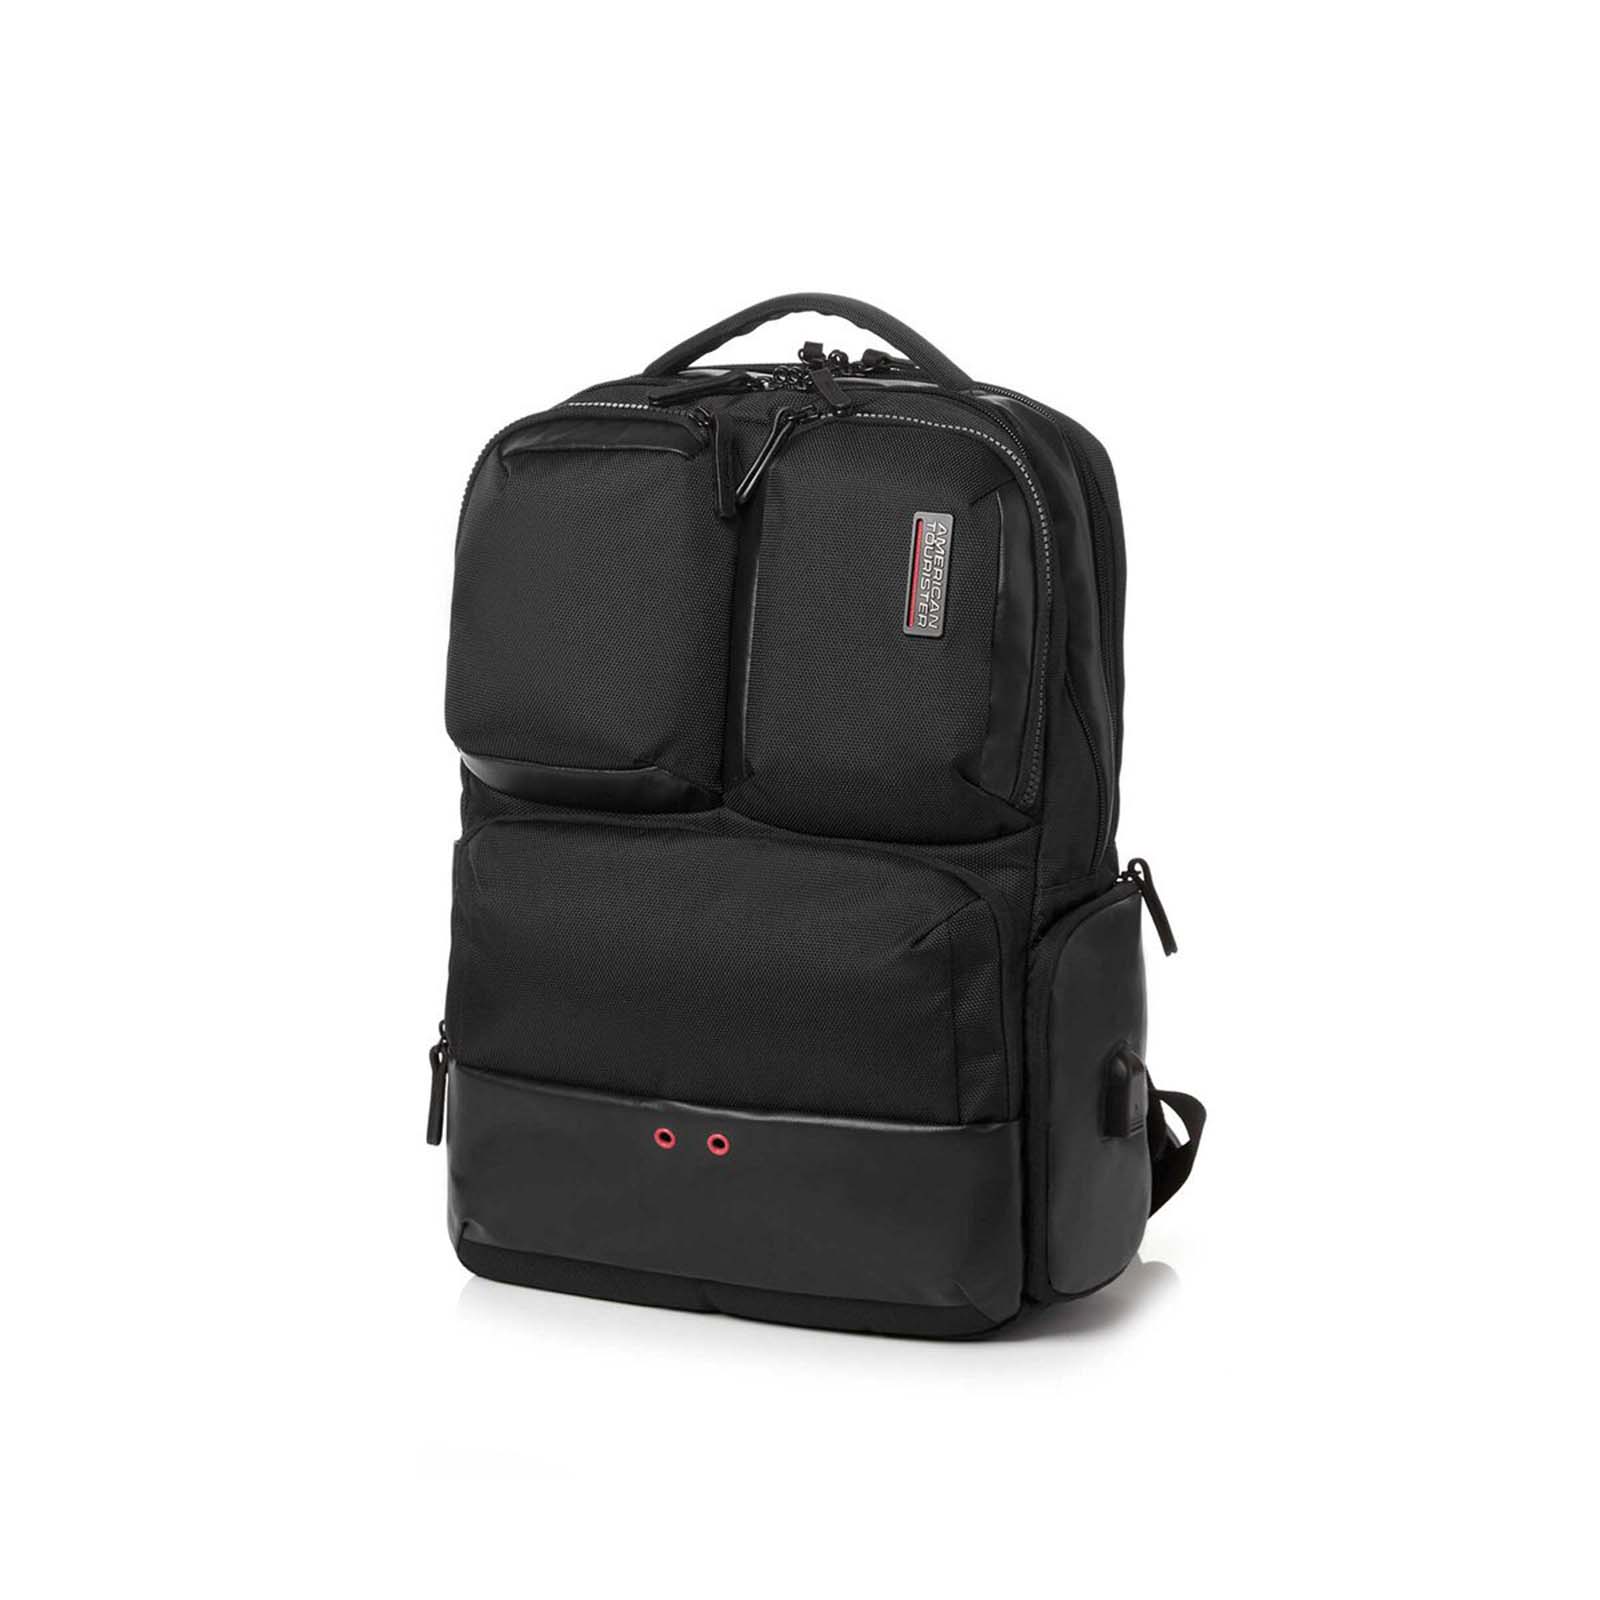 American-Tourister-Zork-15-Inch-Laptop-Backpack-Black-Front-Angle